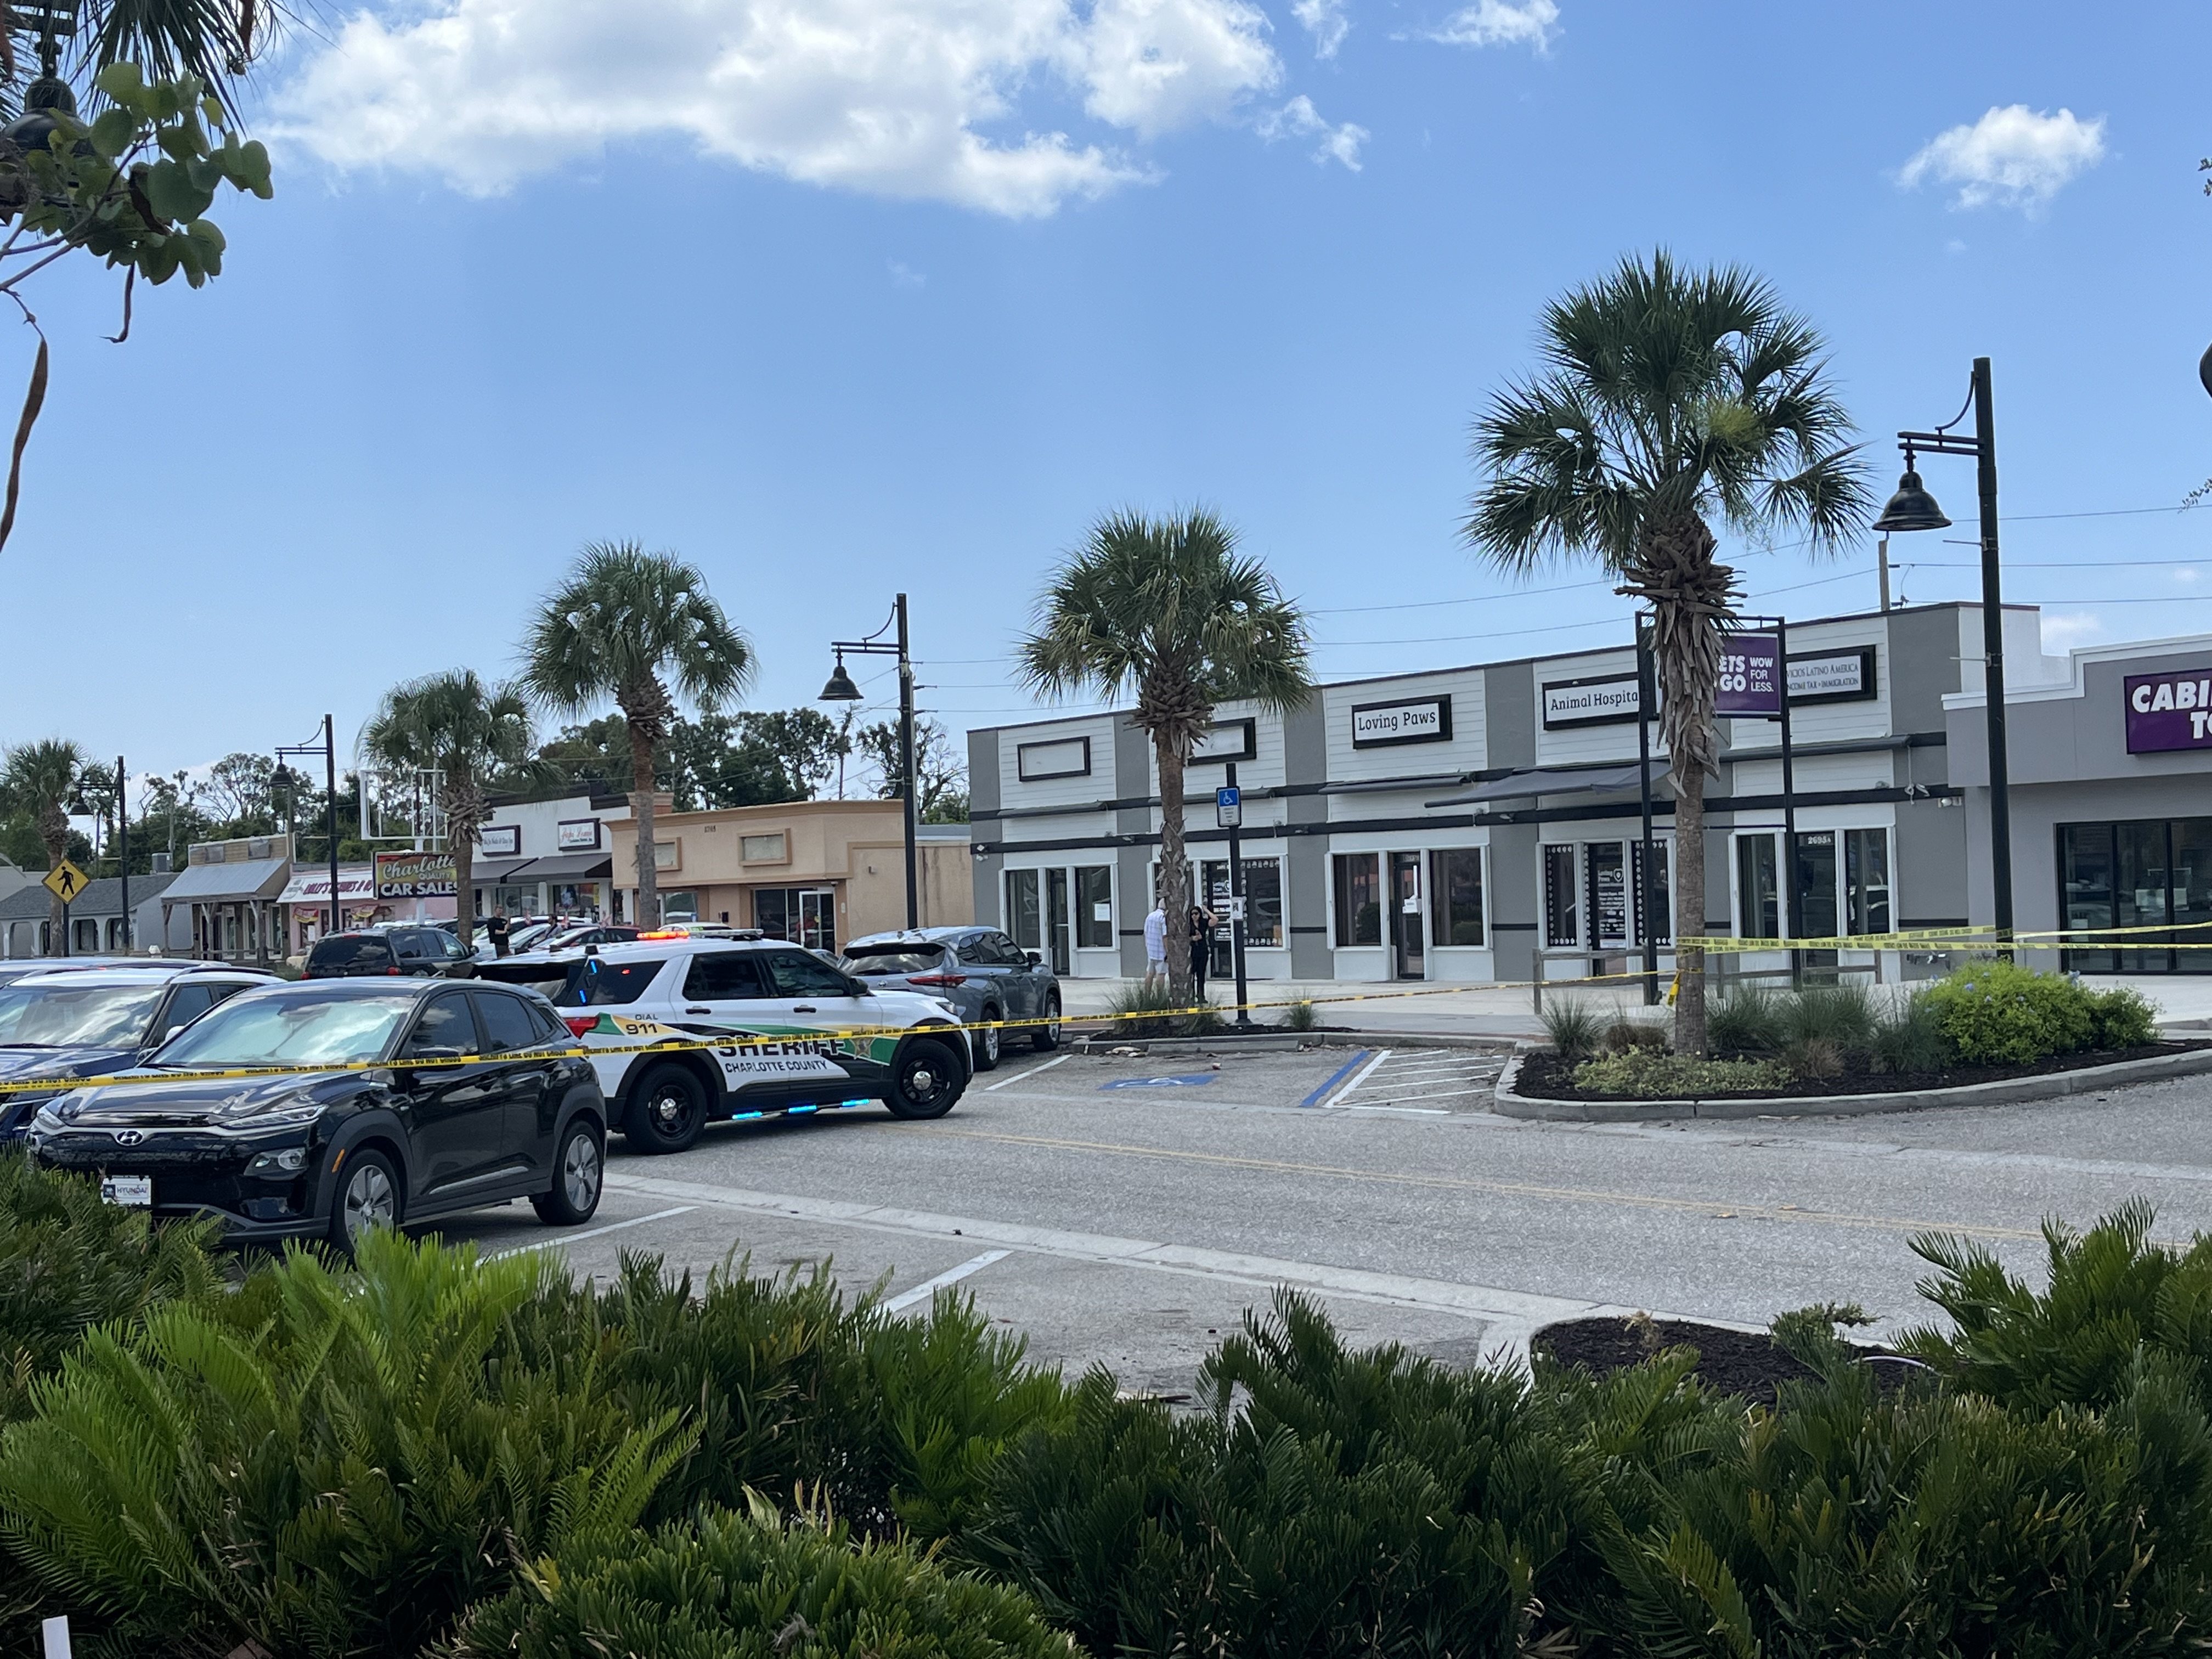 Active investigation into armed robbery at Charlotte County business.